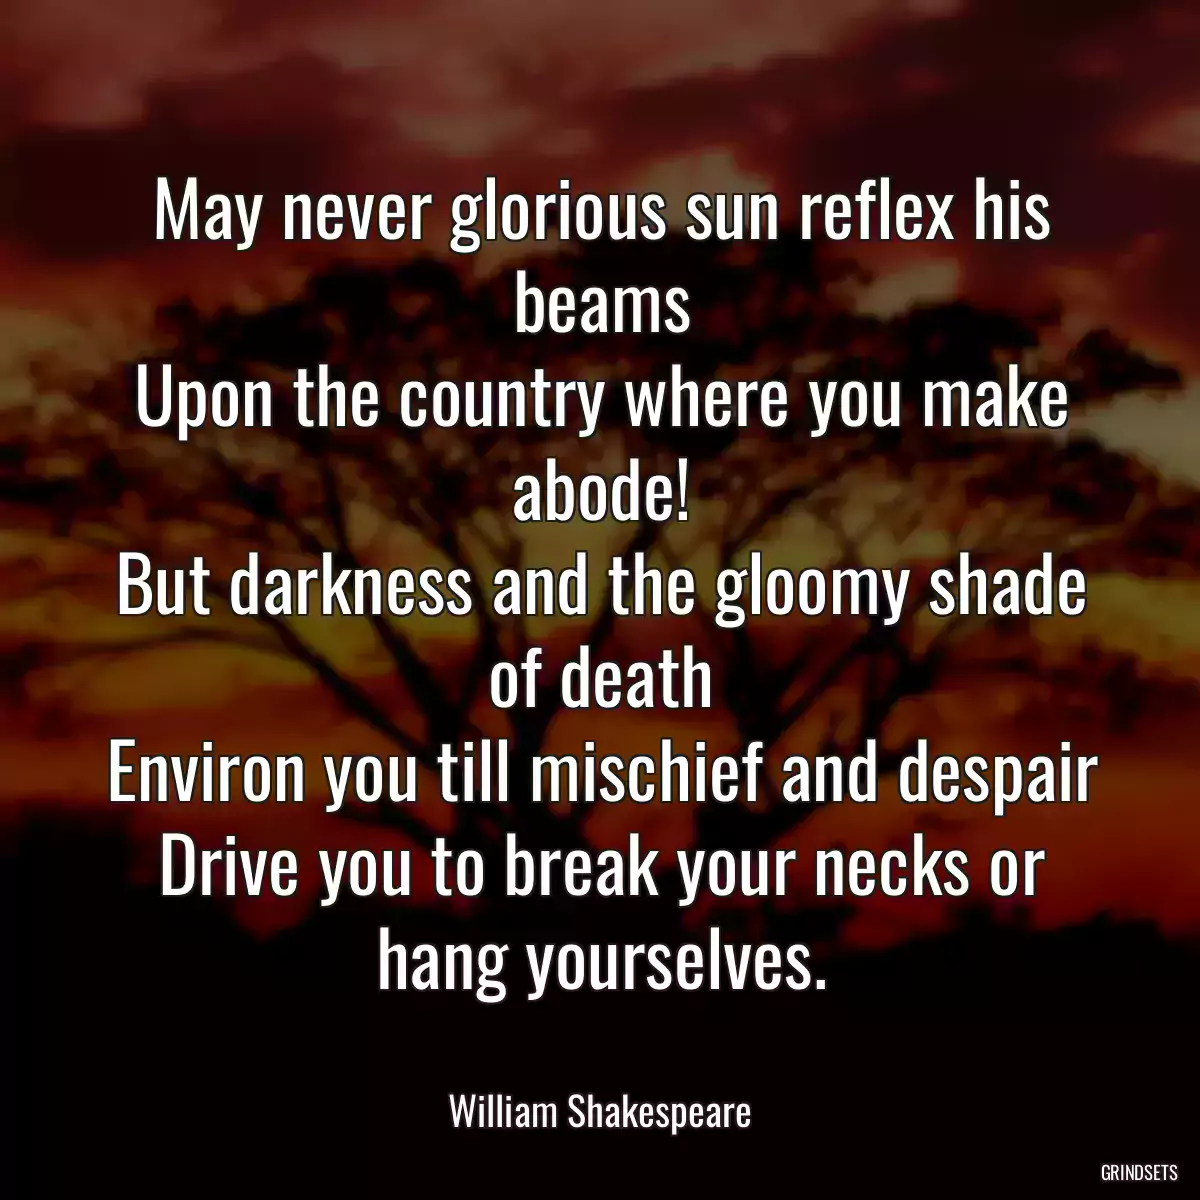 May never glorious sun reflex his beams
Upon the country where you make abode!
But darkness and the gloomy shade of death
Environ you till mischief and despair
Drive you to break your necks or hang yourselves.